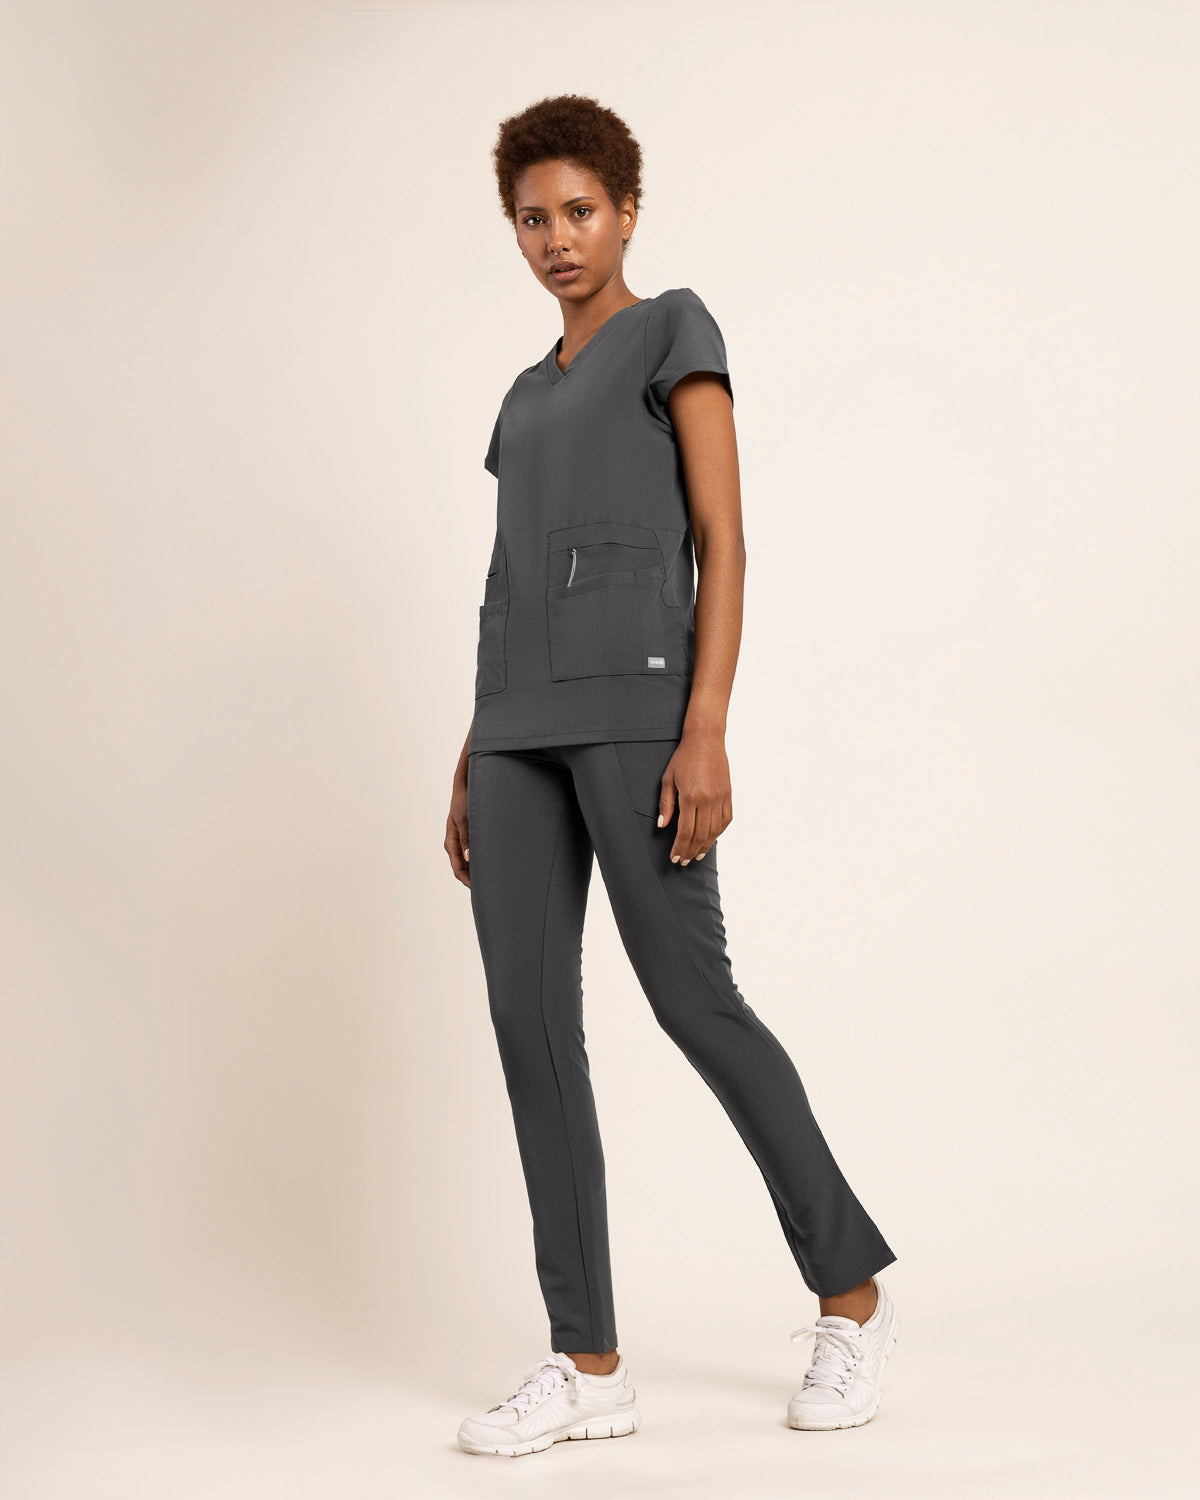 TOP MUJER ADVANCE GRIS